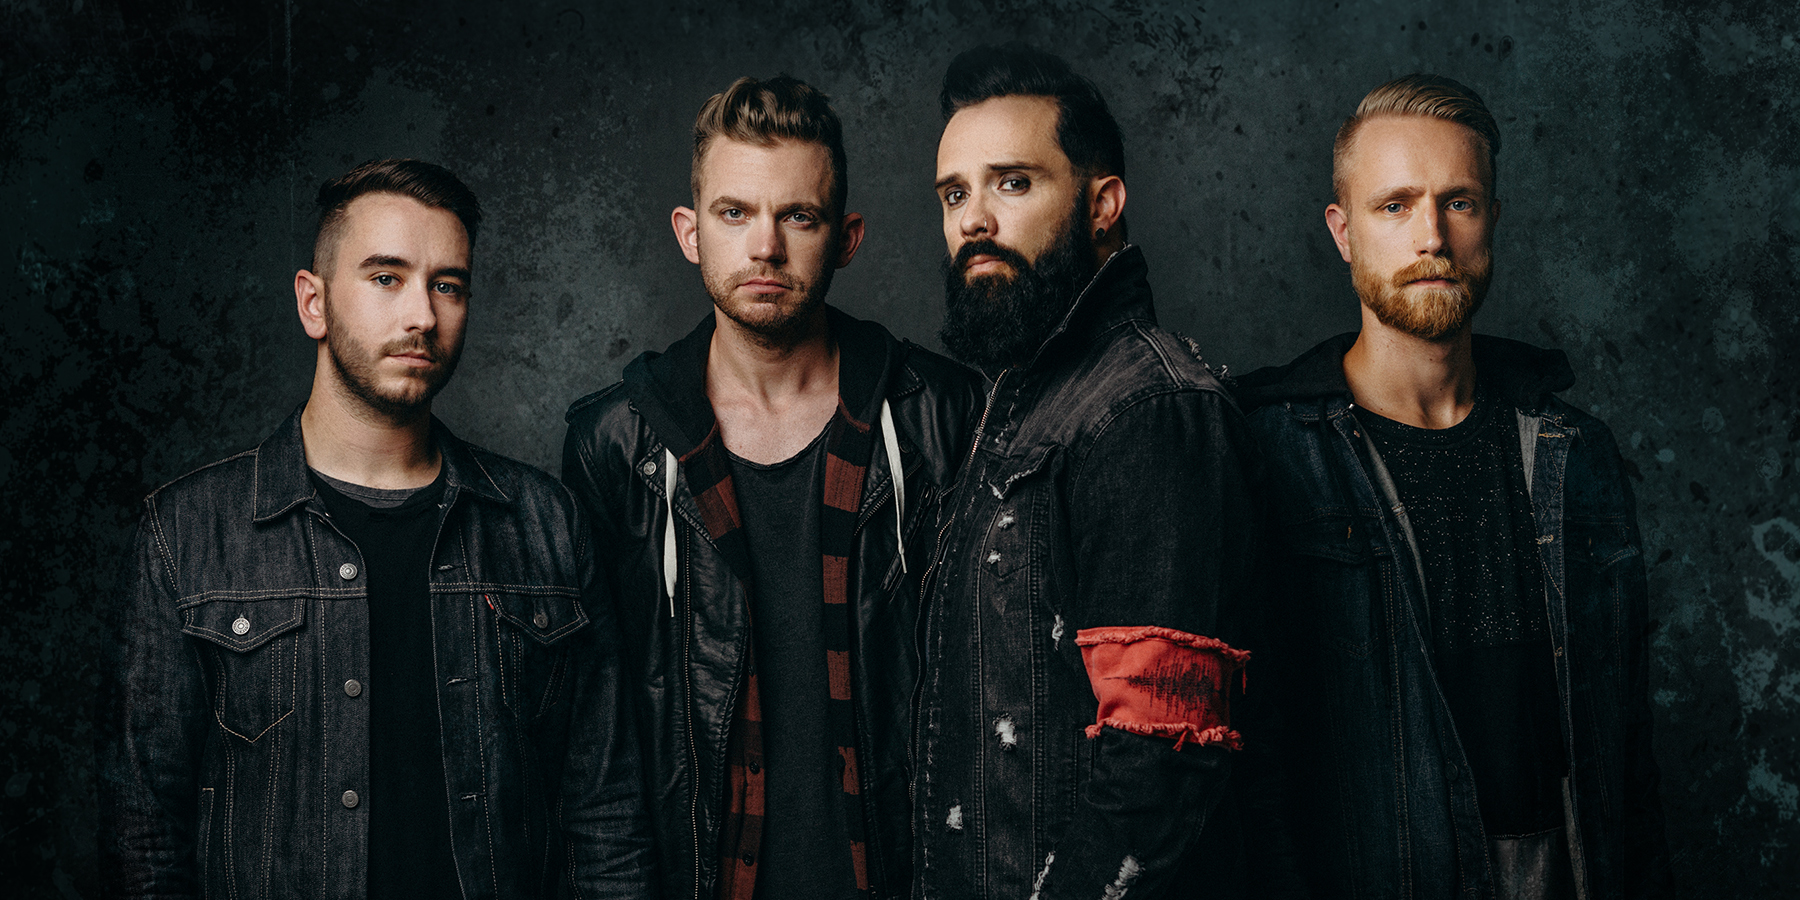 Fight The Fury feat. John Cooper of Skillet